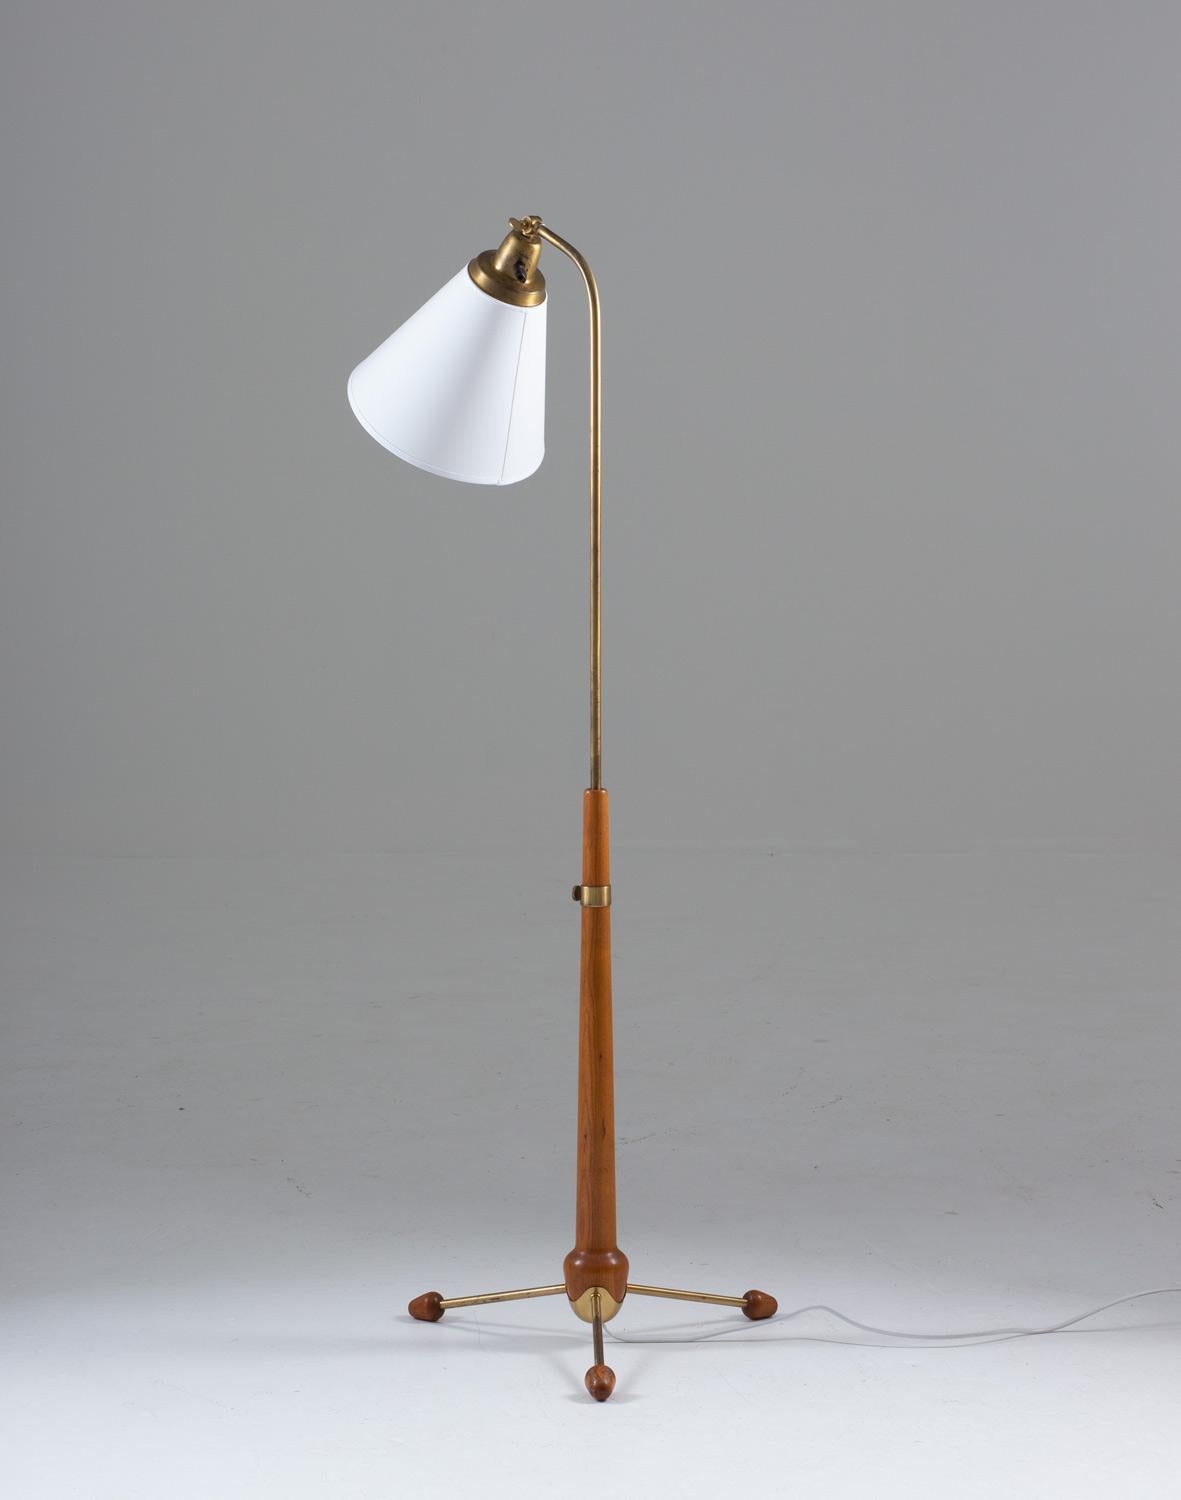 Lovely tripod floor lamp in brass and stained beech by Hans Bergström for Swedish manufacturer Ateljé Lyktan. The height of the lamp is adjustable.
Condition: Very good original condition with some patina on the brass parts. New shade.